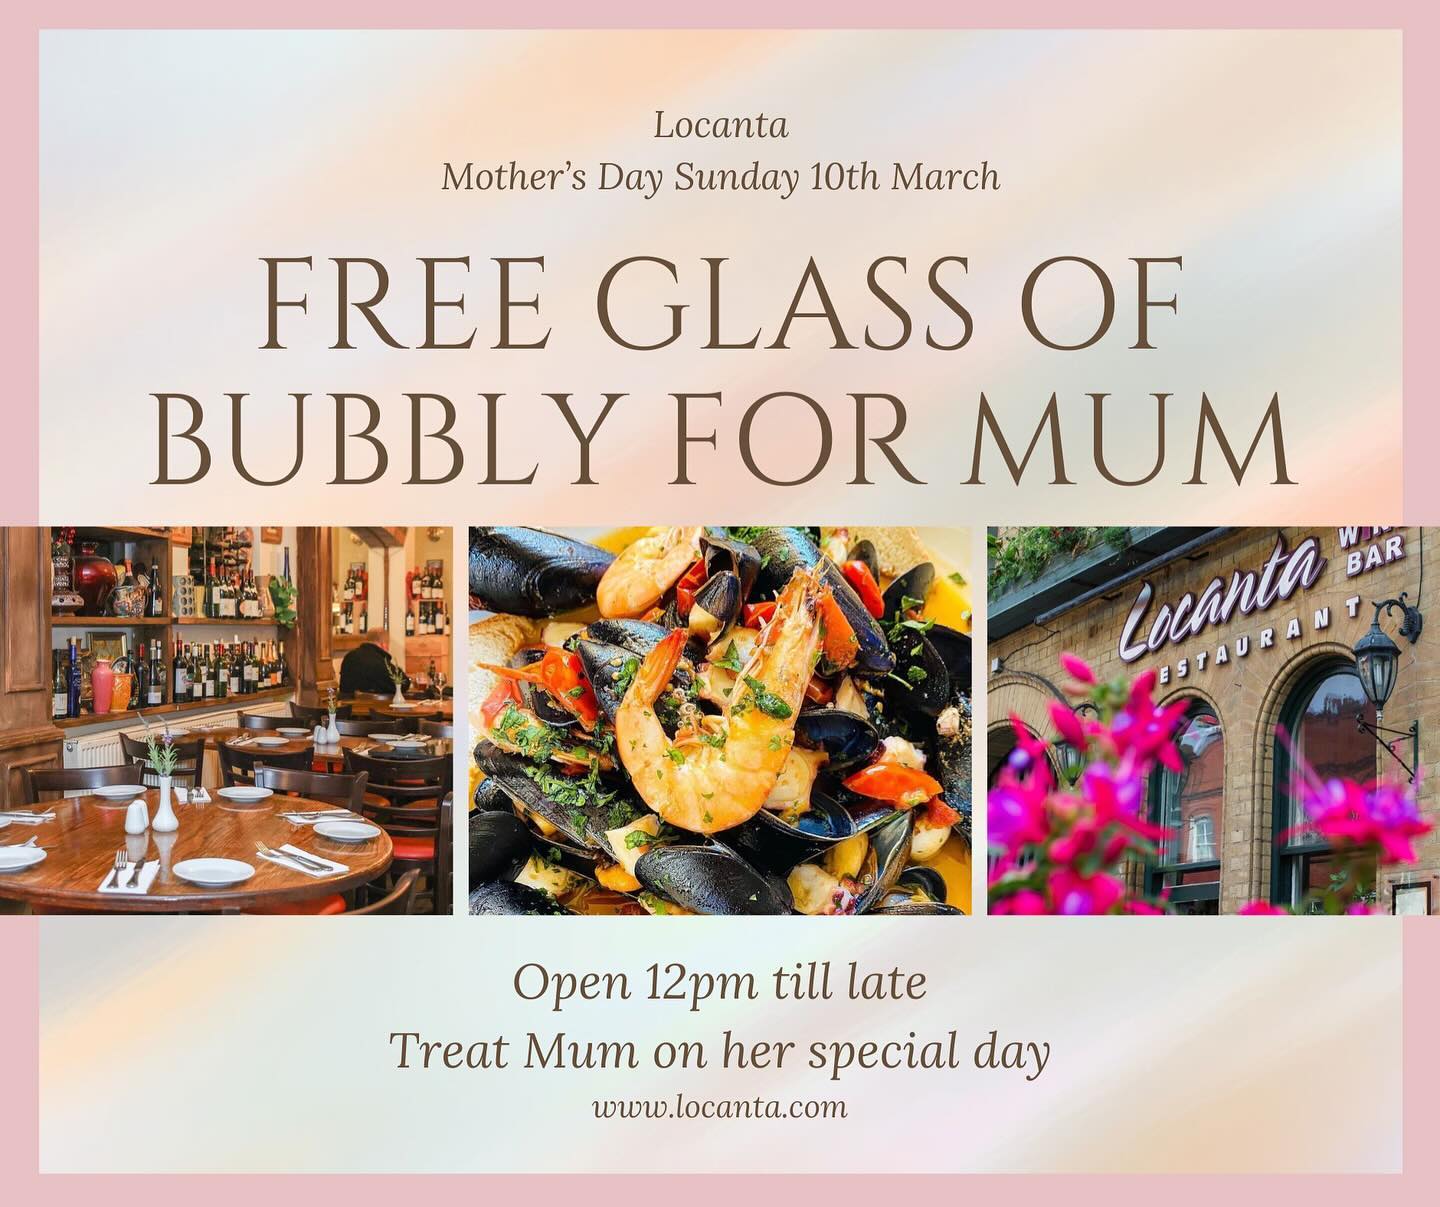 Spoil Mum on her special day at Locanta with beautiful seafood, steak, fine wines & of course a free glass of bubbly 🥂🍷🍽️

#locanta #mothersday #jq #jewelleryquarter #birmingham #foodies #wine #winelover #family #mum #bhameats #bhamfoodie